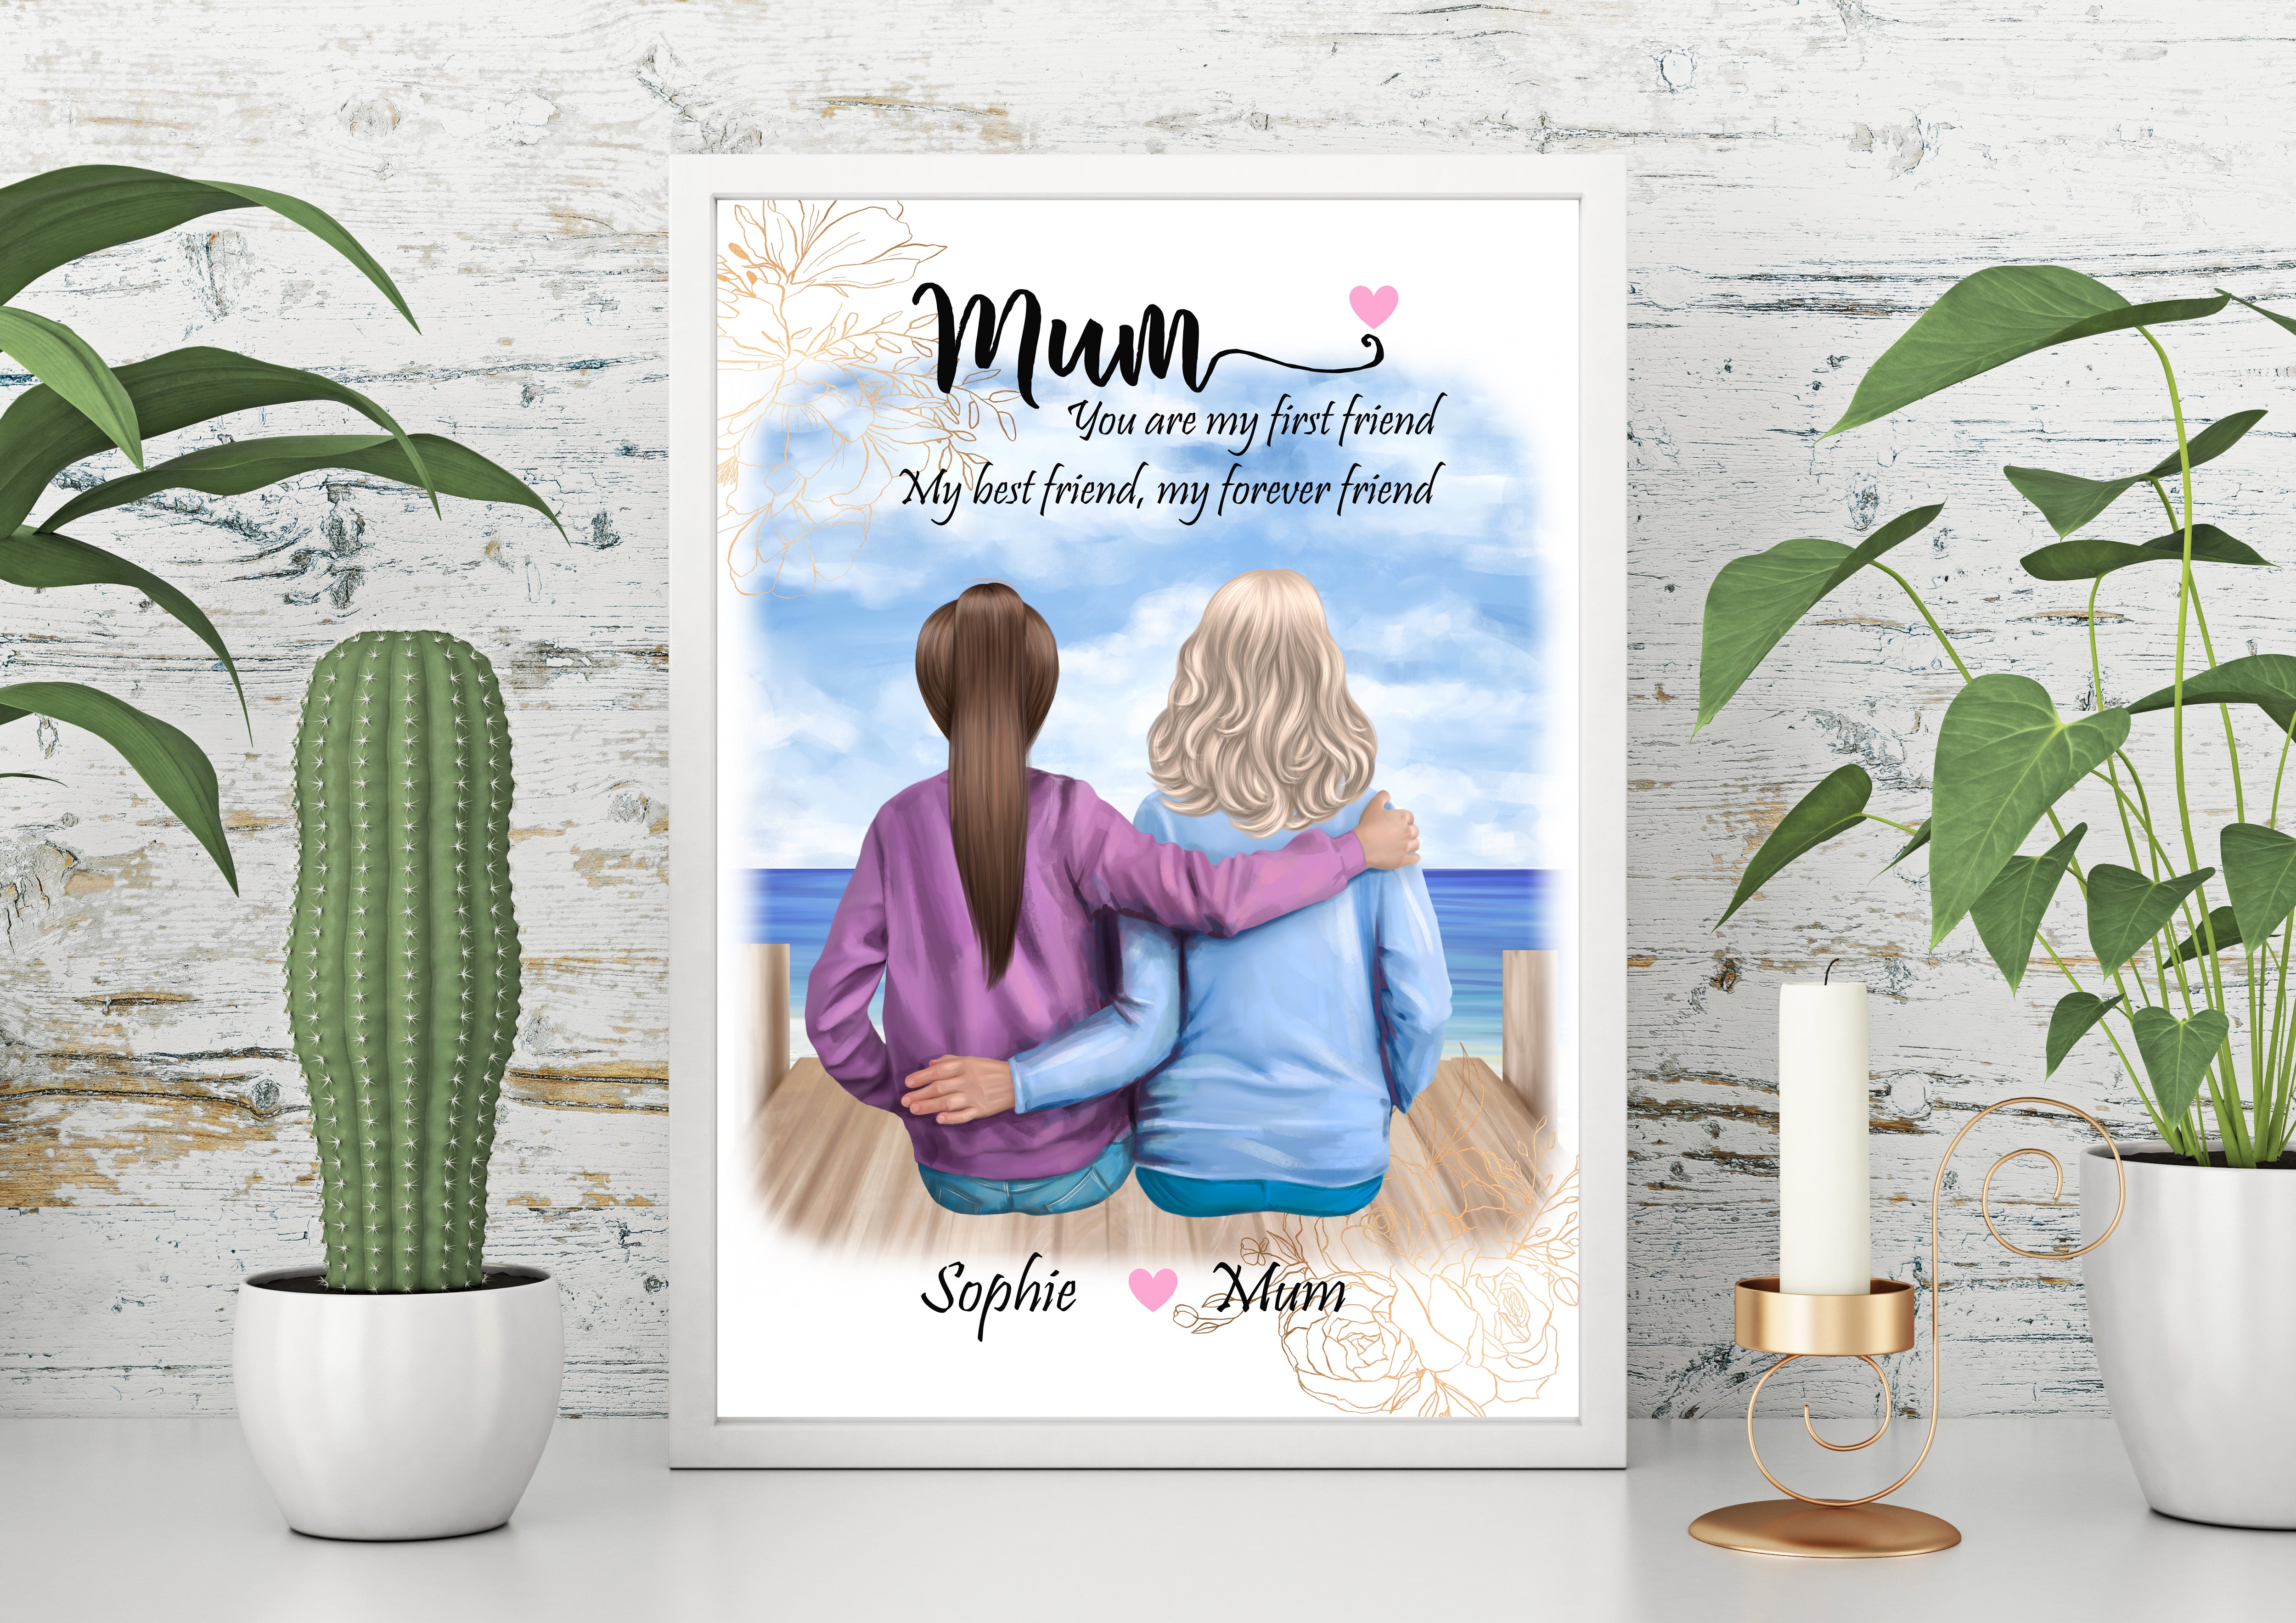 Personalised MOTHER'S DAY Prints